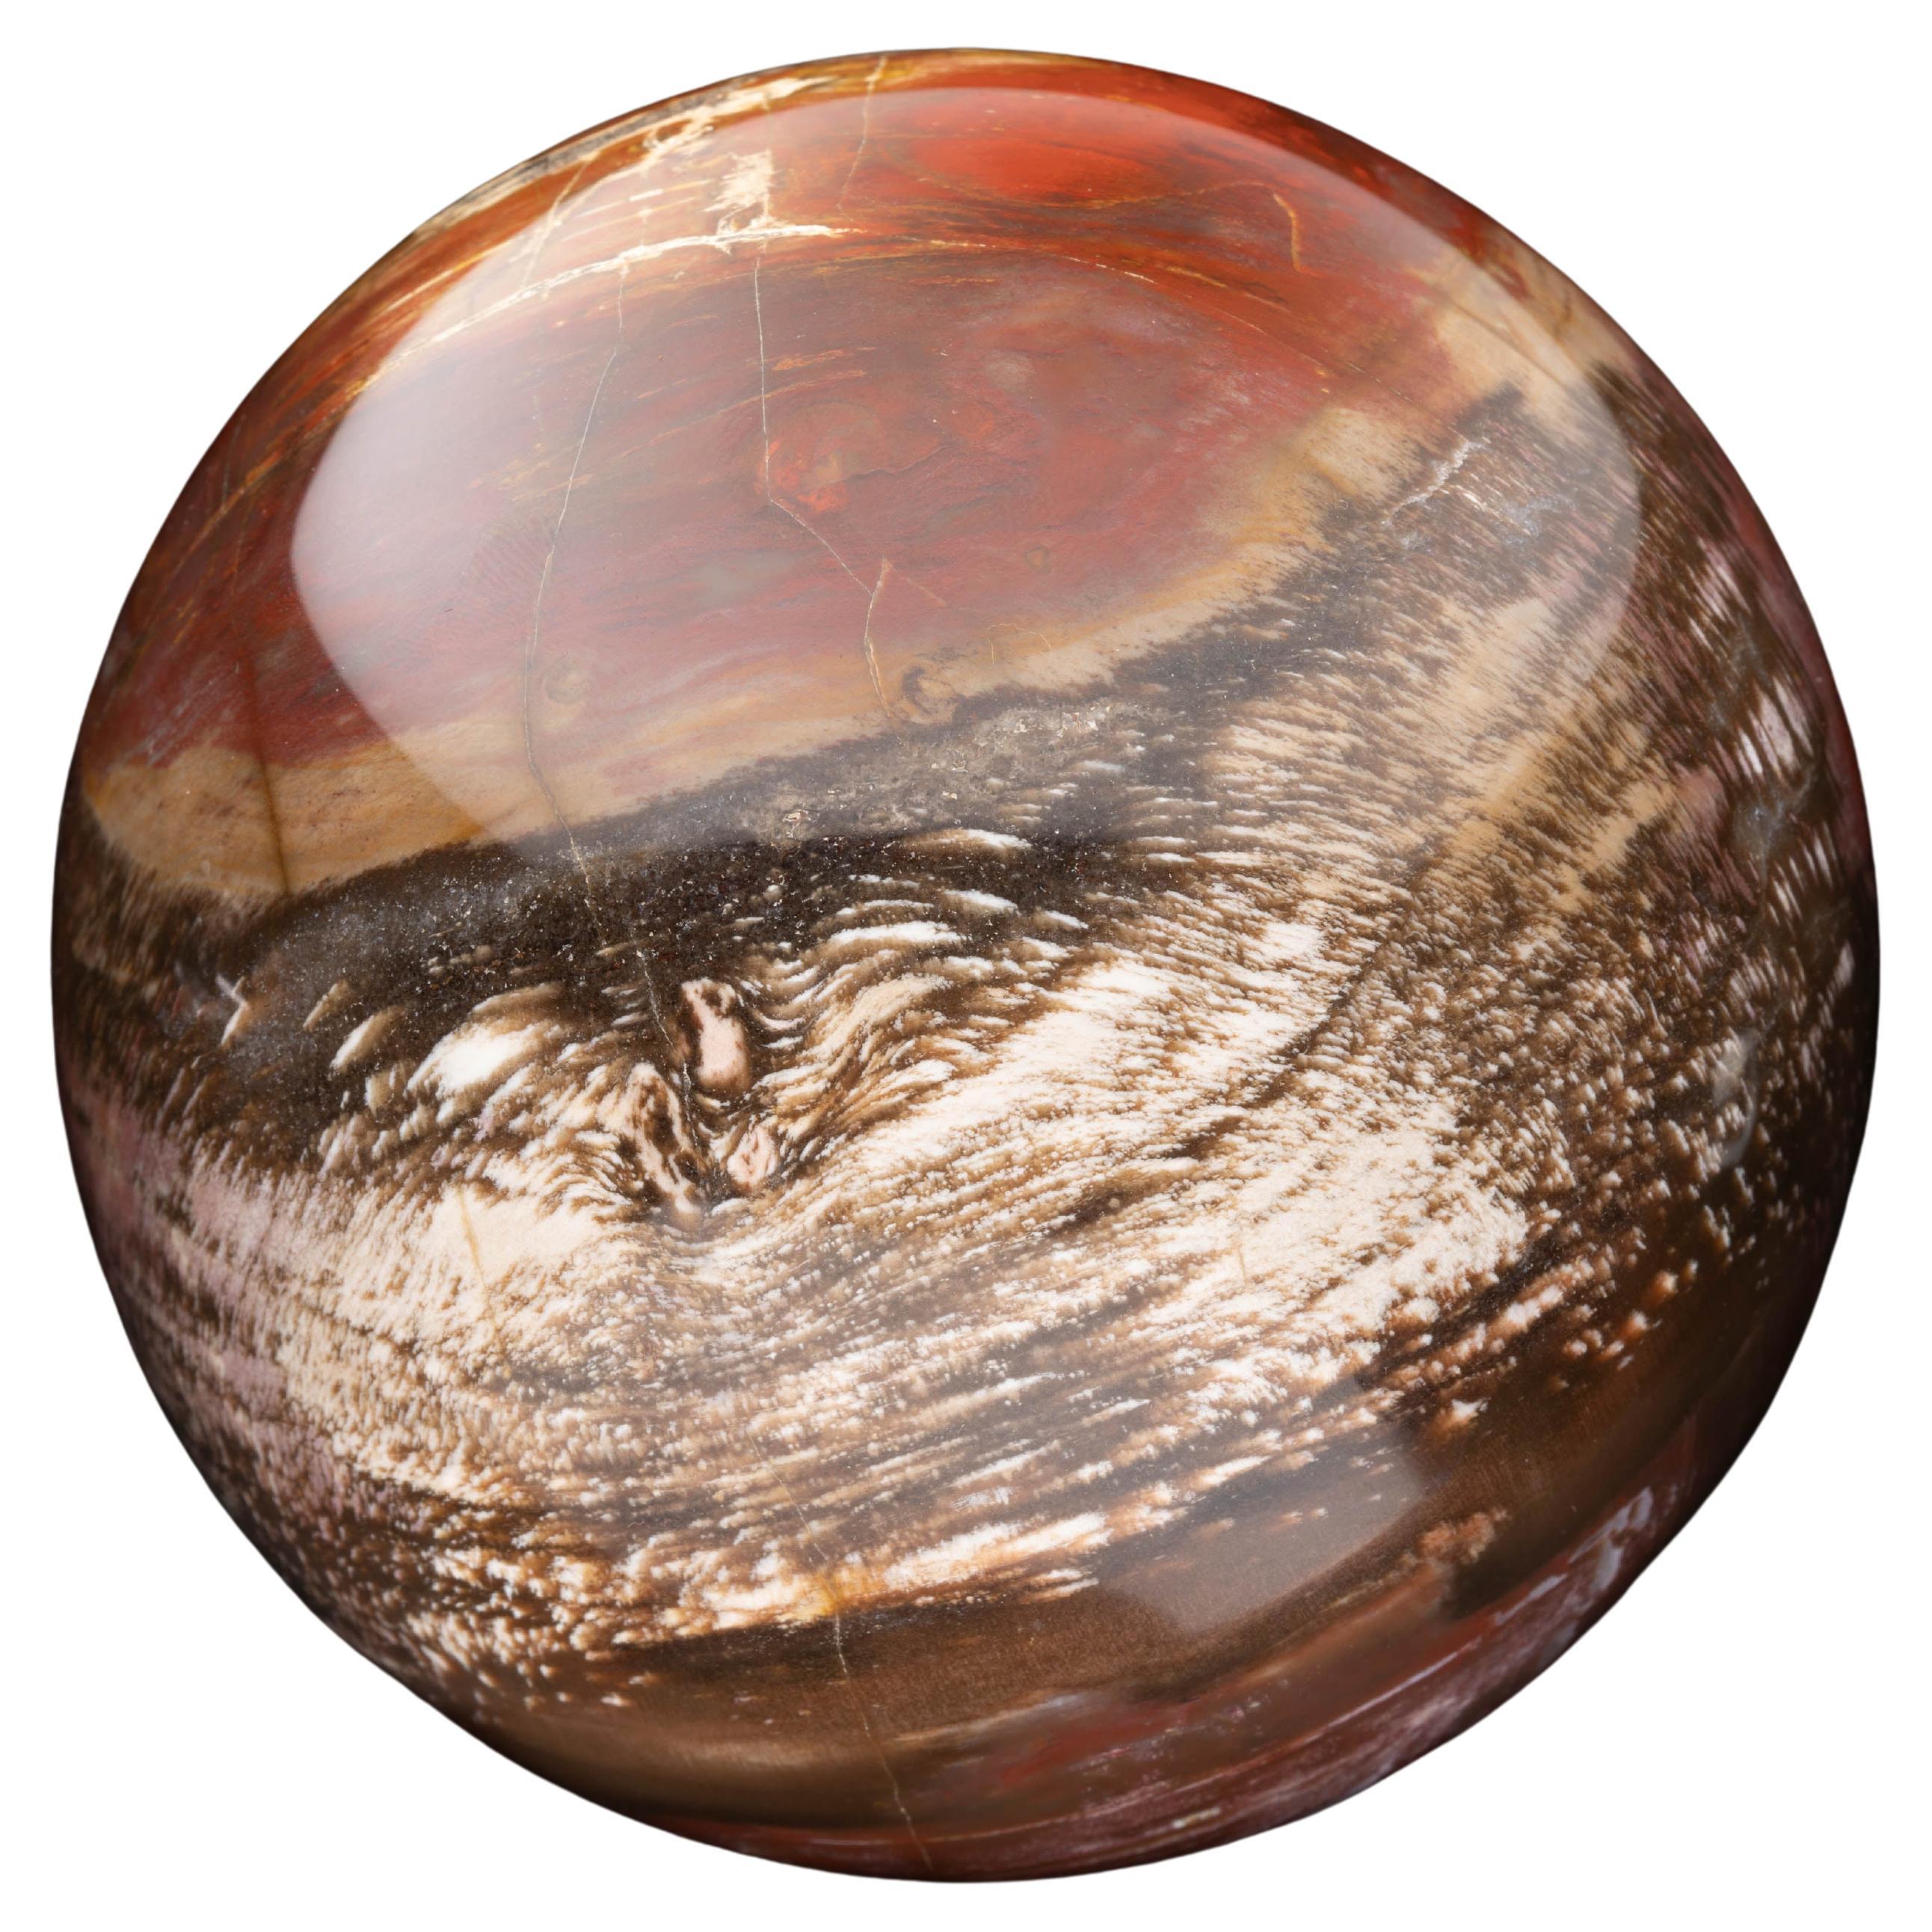 Genuine Hand-Carved Petrified Wood Sphere from Arizona // 3.20 Lb